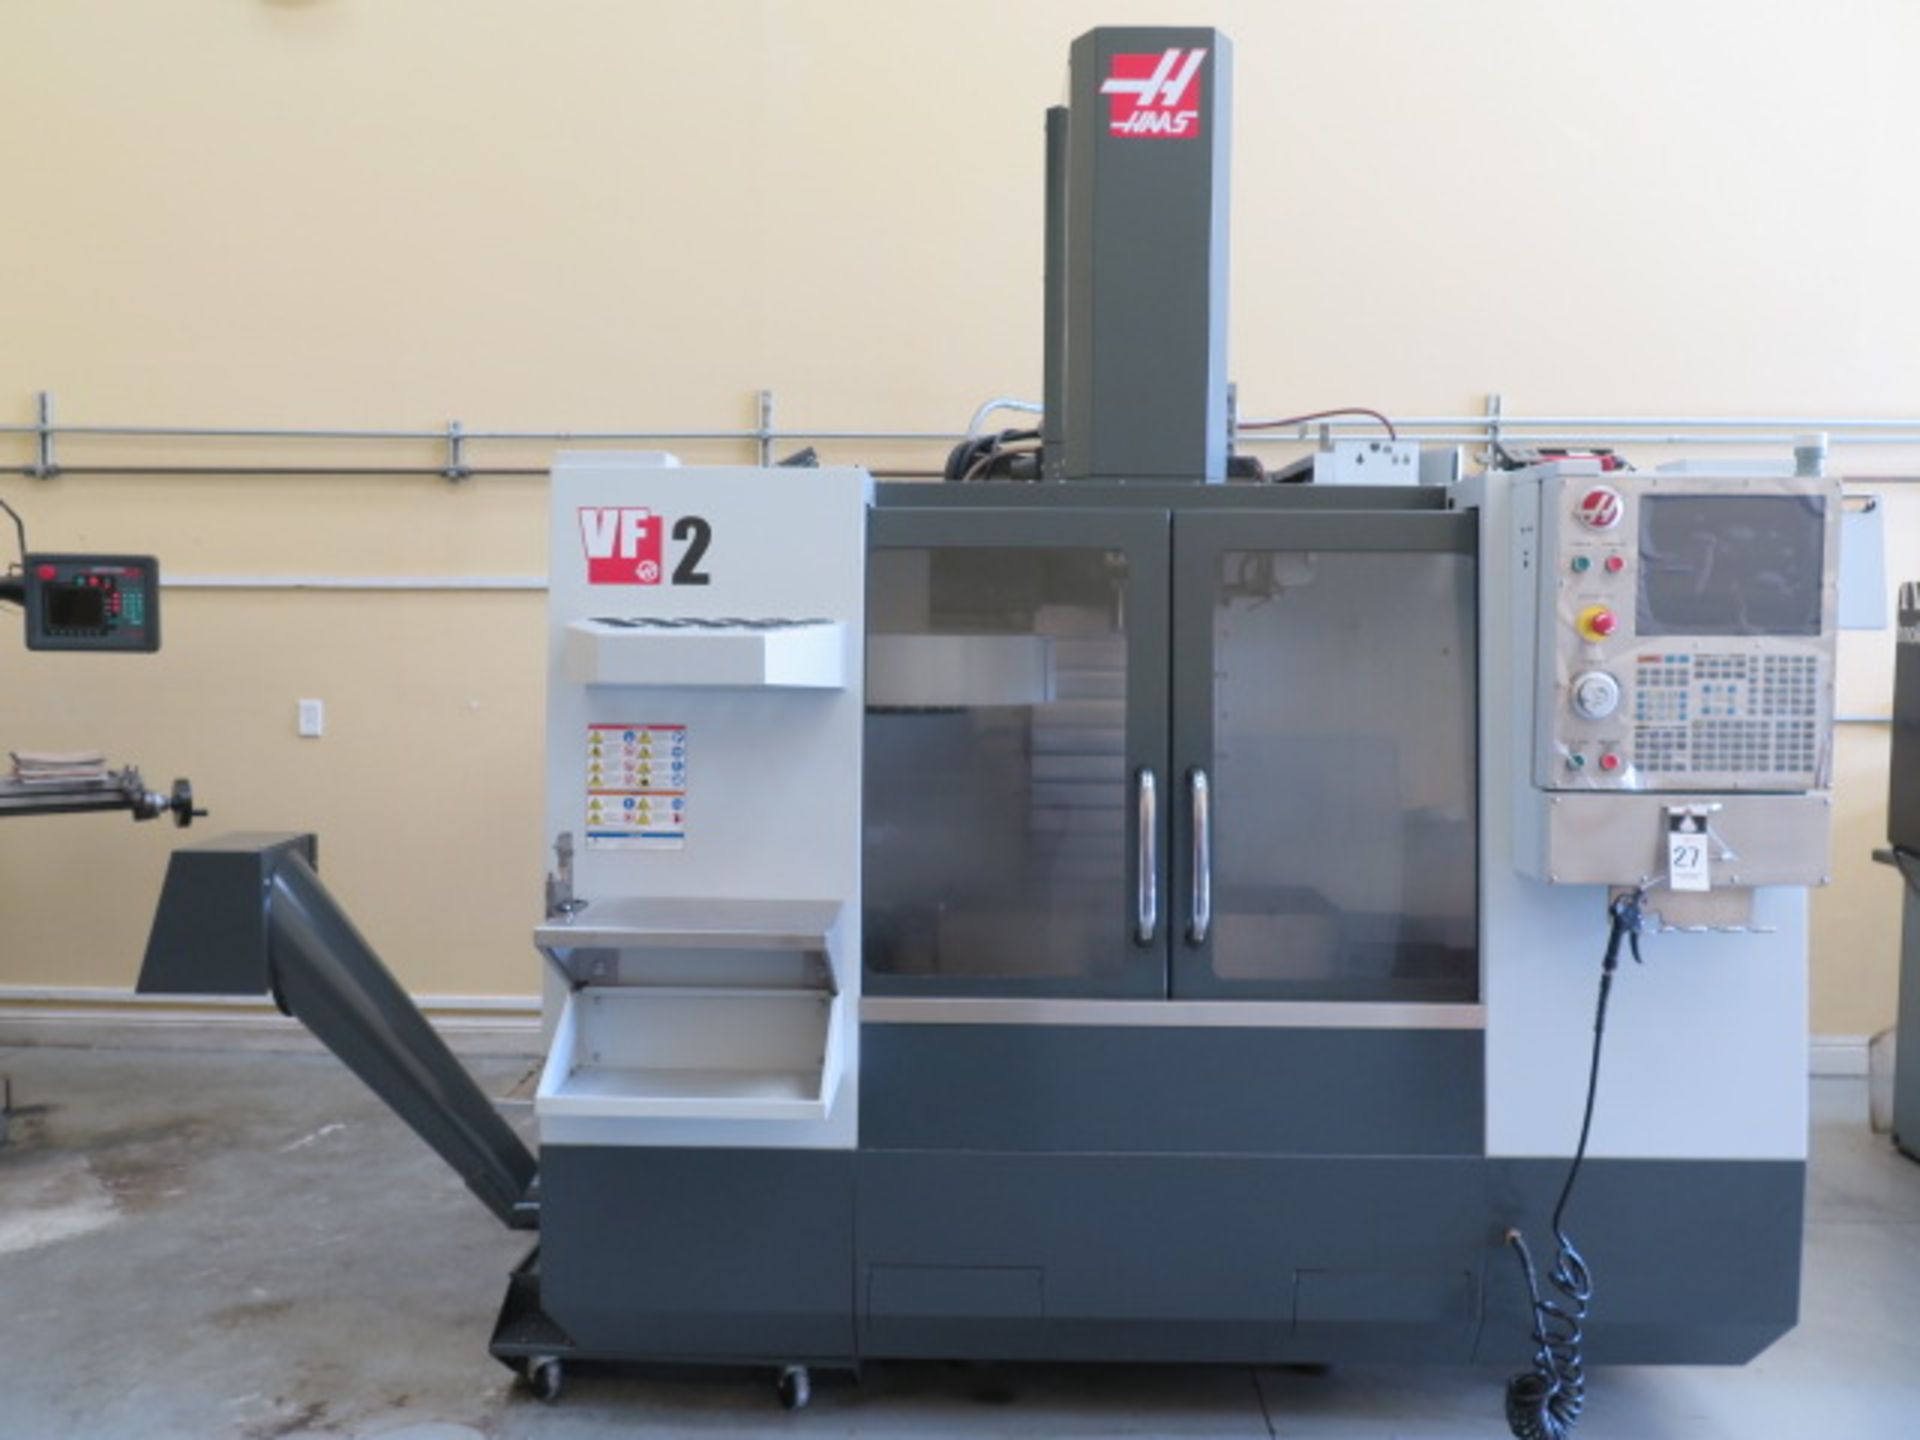 2012 Haas VF-2 CNC Vertical Machining Center s/n 1092760 w/ Haas Controls, 20-Station ATC, CAT-40